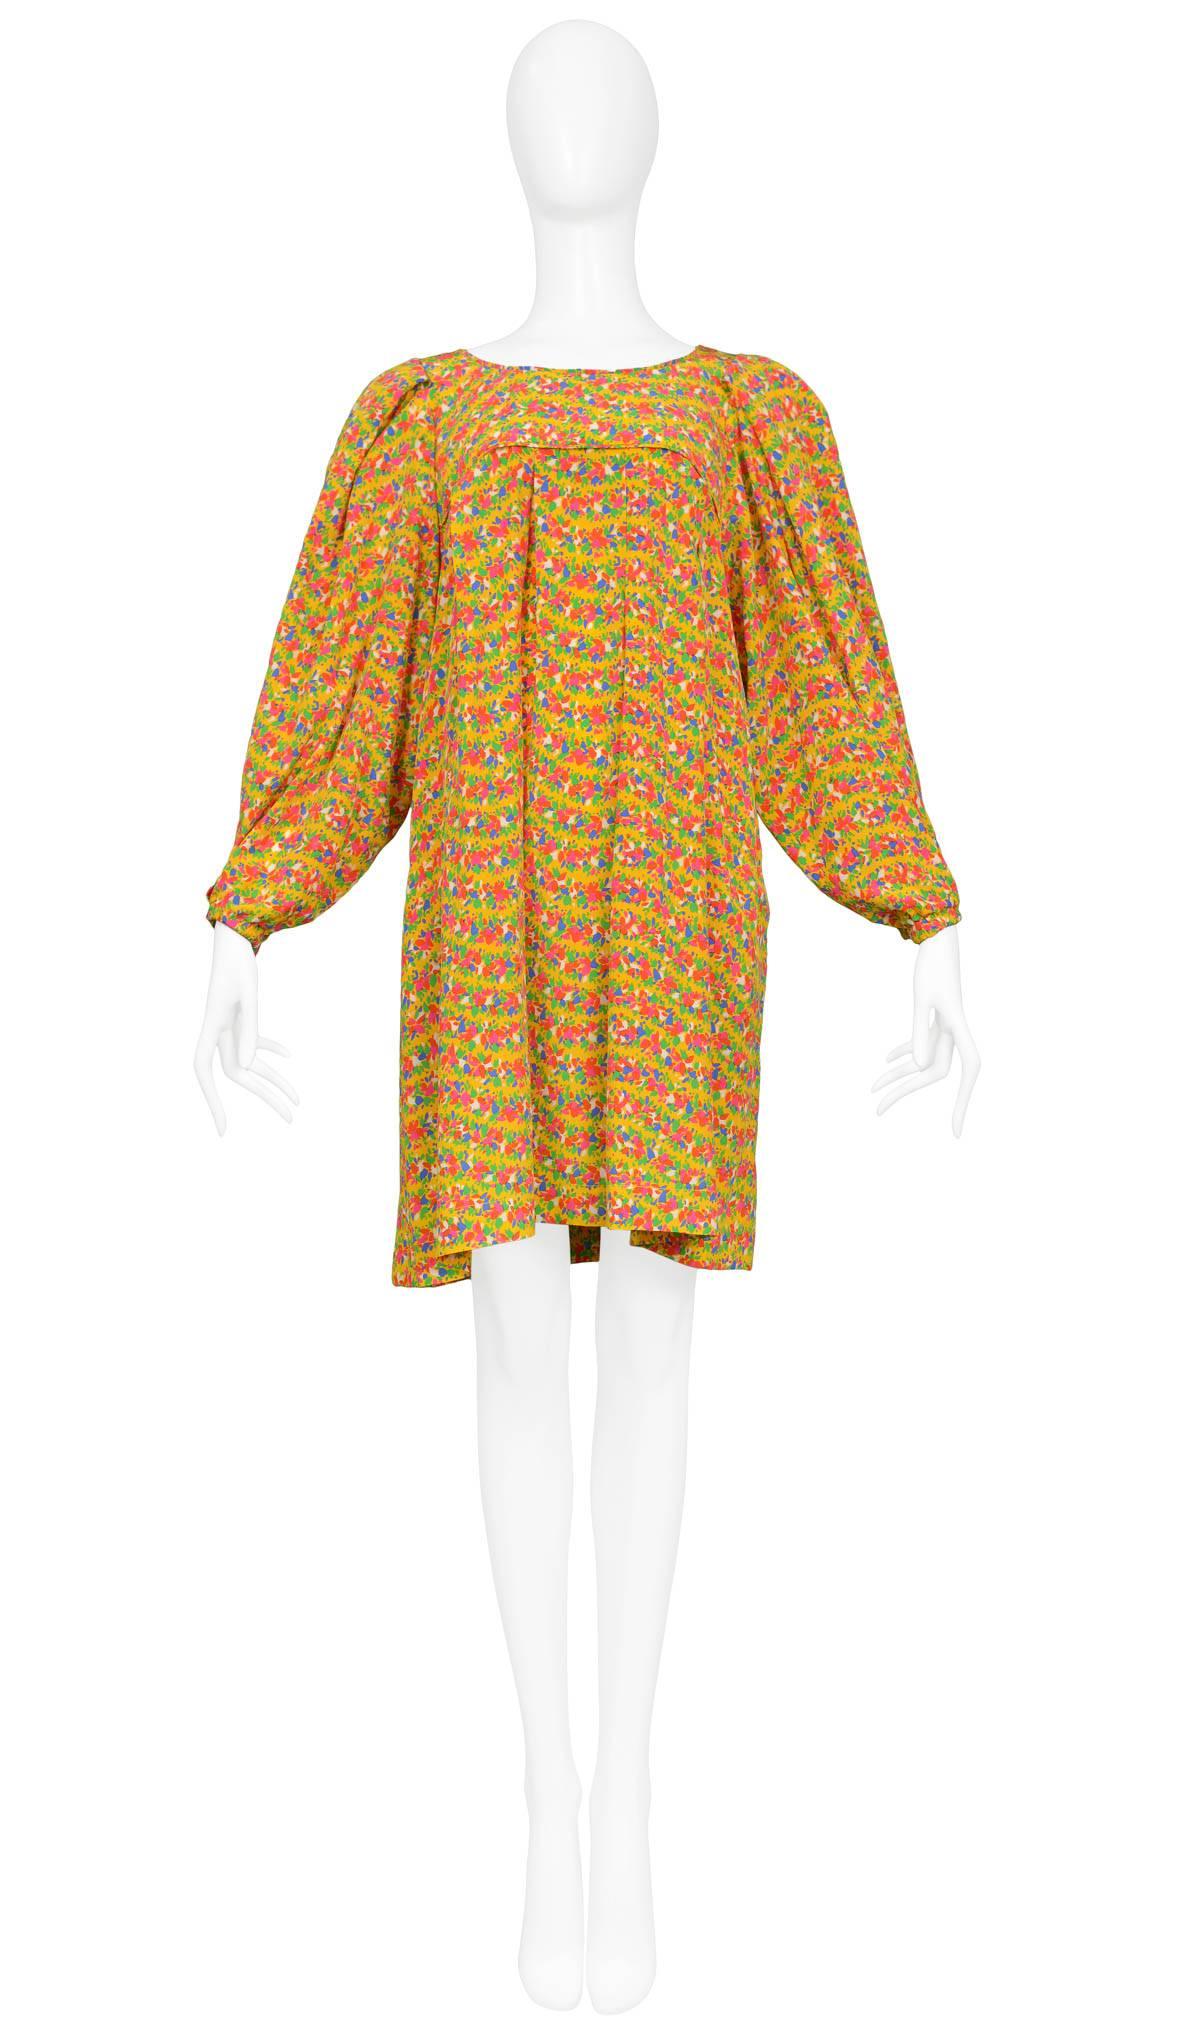 Vintage Yves Saint Laurent knee-length yellow silk floral smock mini dress with blouson sleeves. Circa 1970s.

Excellent Condition.

Size: Small